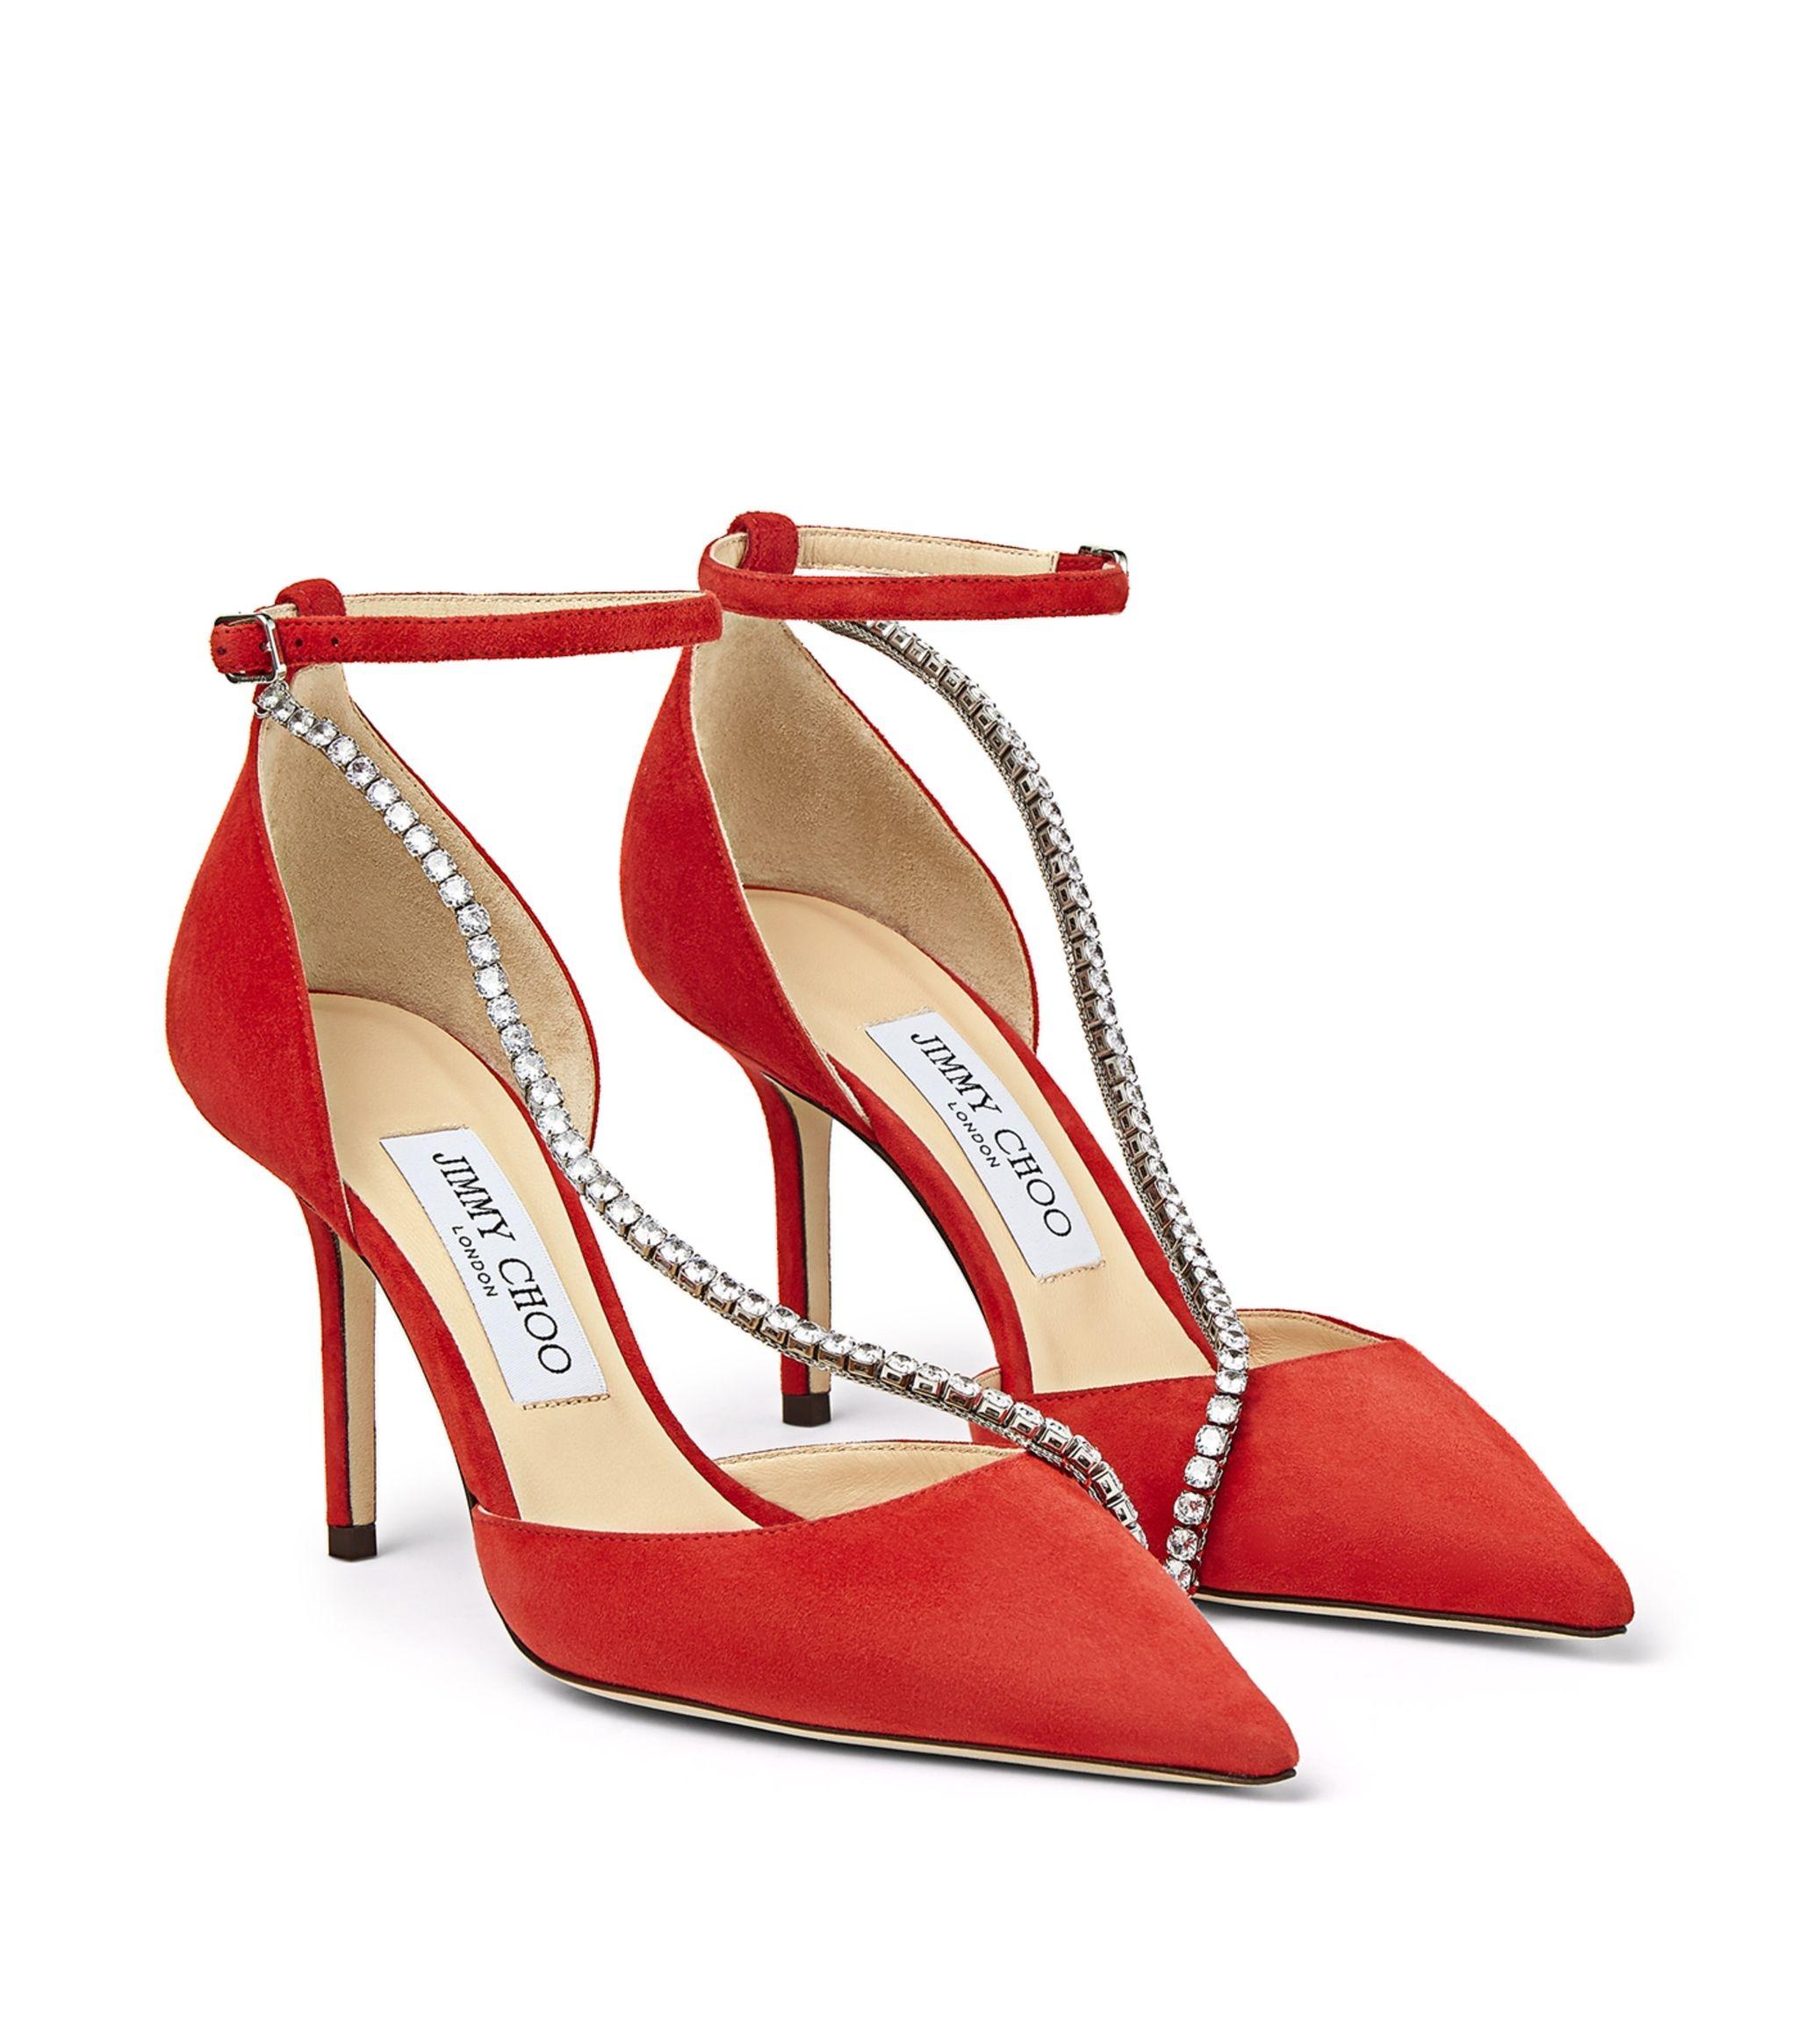 Jimmy Choo Talika 85 Suede Sandals in Red - Save 29% - Lyst